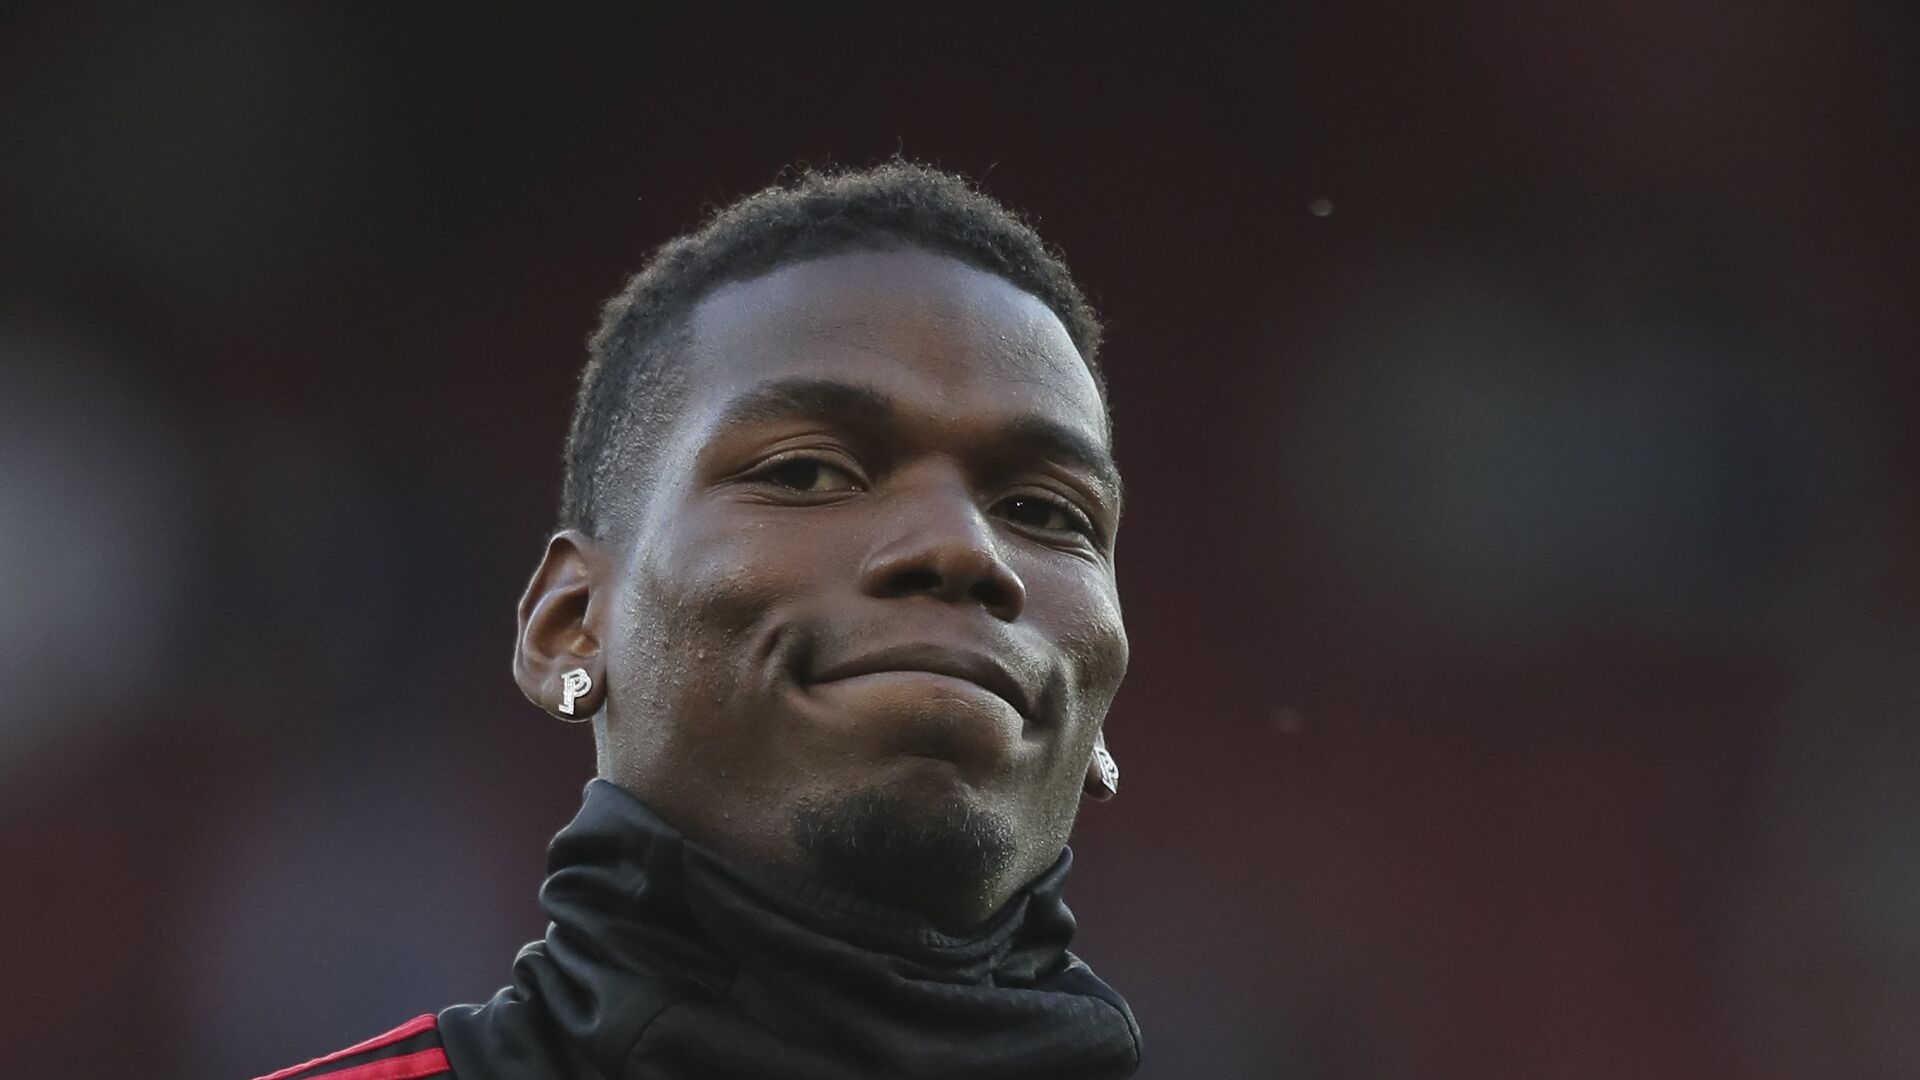 Manchester United's Paul Pogba applauds the fans as he takes part in the warm up prior to the start of the English Premier League soccer match between Manchester United and Leicester City at Old Trafford, in Manchester, England, Friday, Aug. 10, 2018 - اسپوتنیک افغانستان  , 1920, 10.05.2022